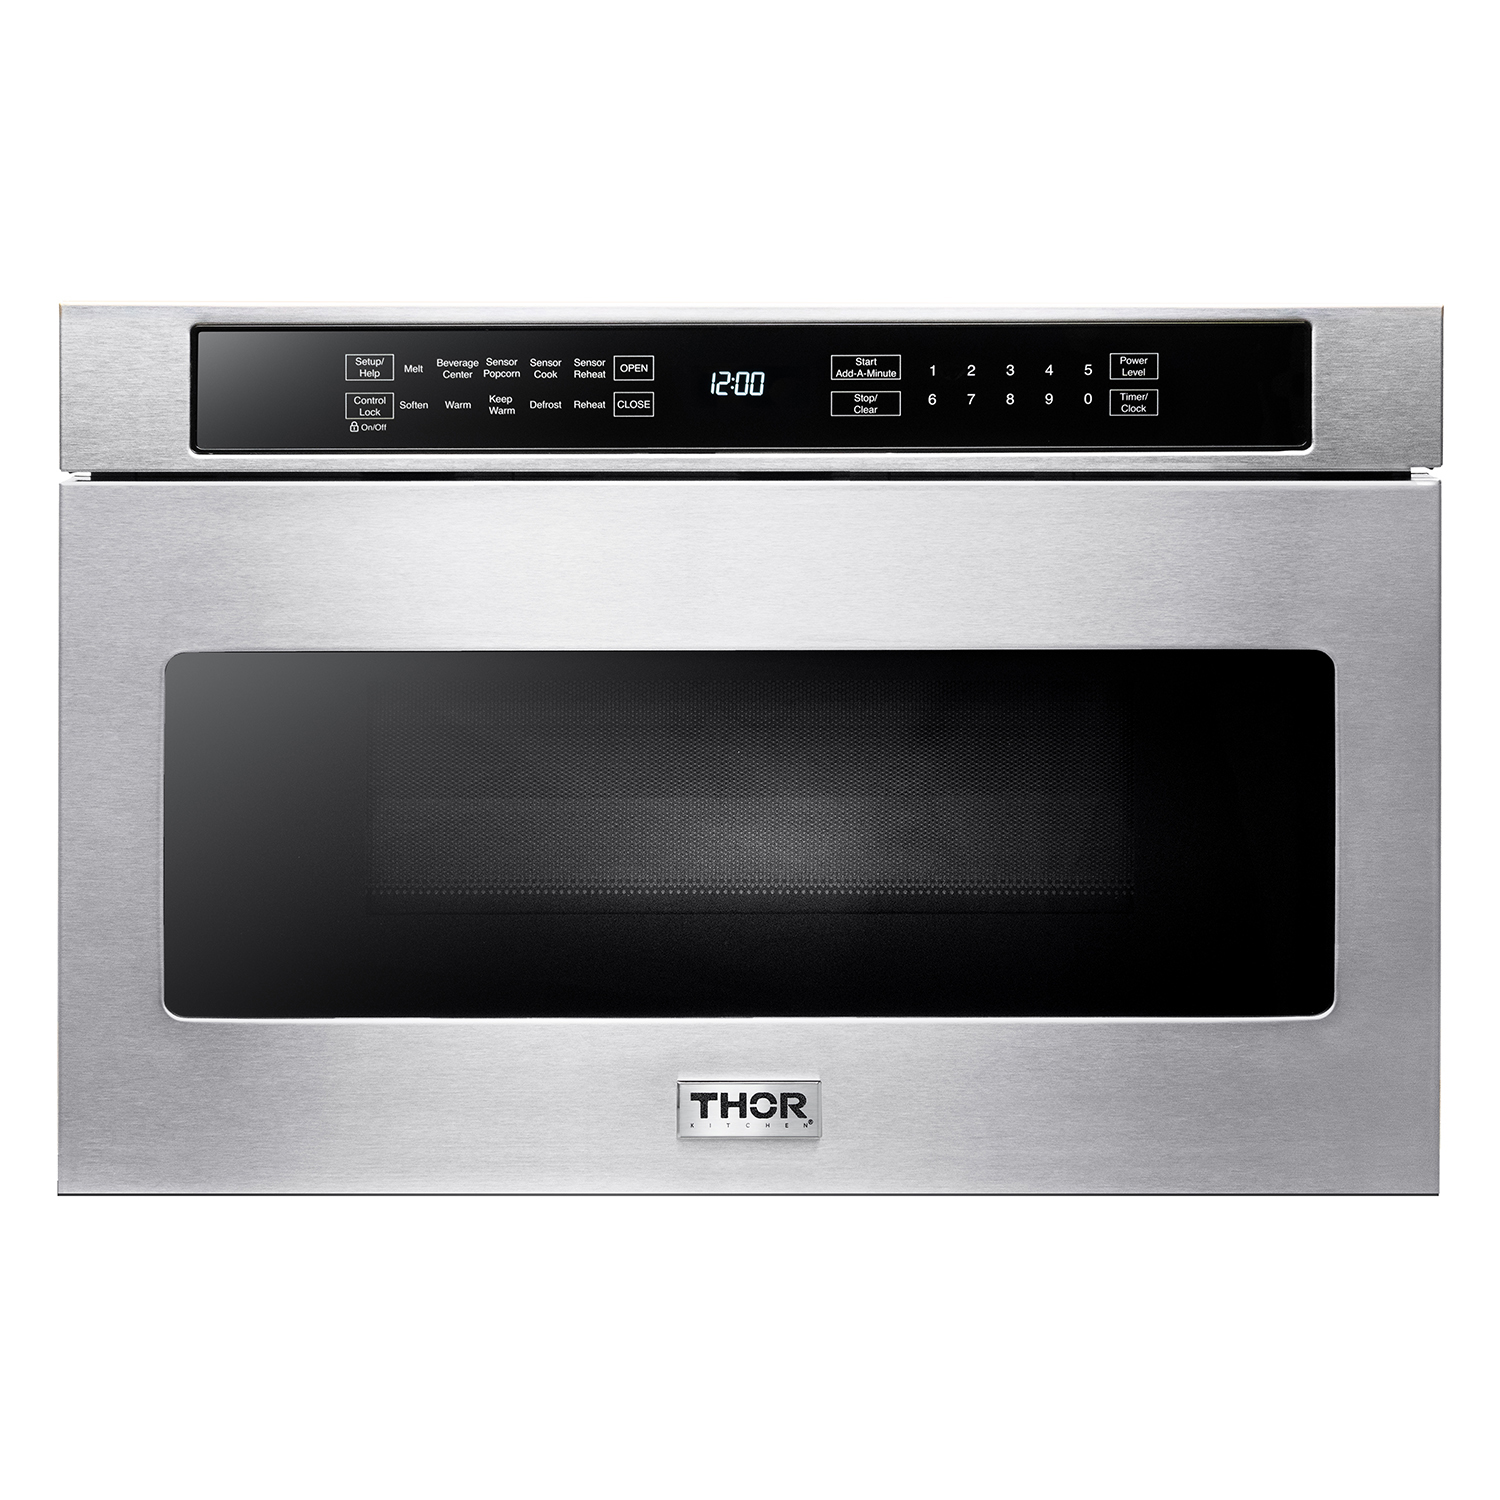 30 Thor Kitchen Countertop Microwave Ovens 1.7cu.ft Build-in Stainless Steel Charcoal Filter Sensor Cooking HOR3001 